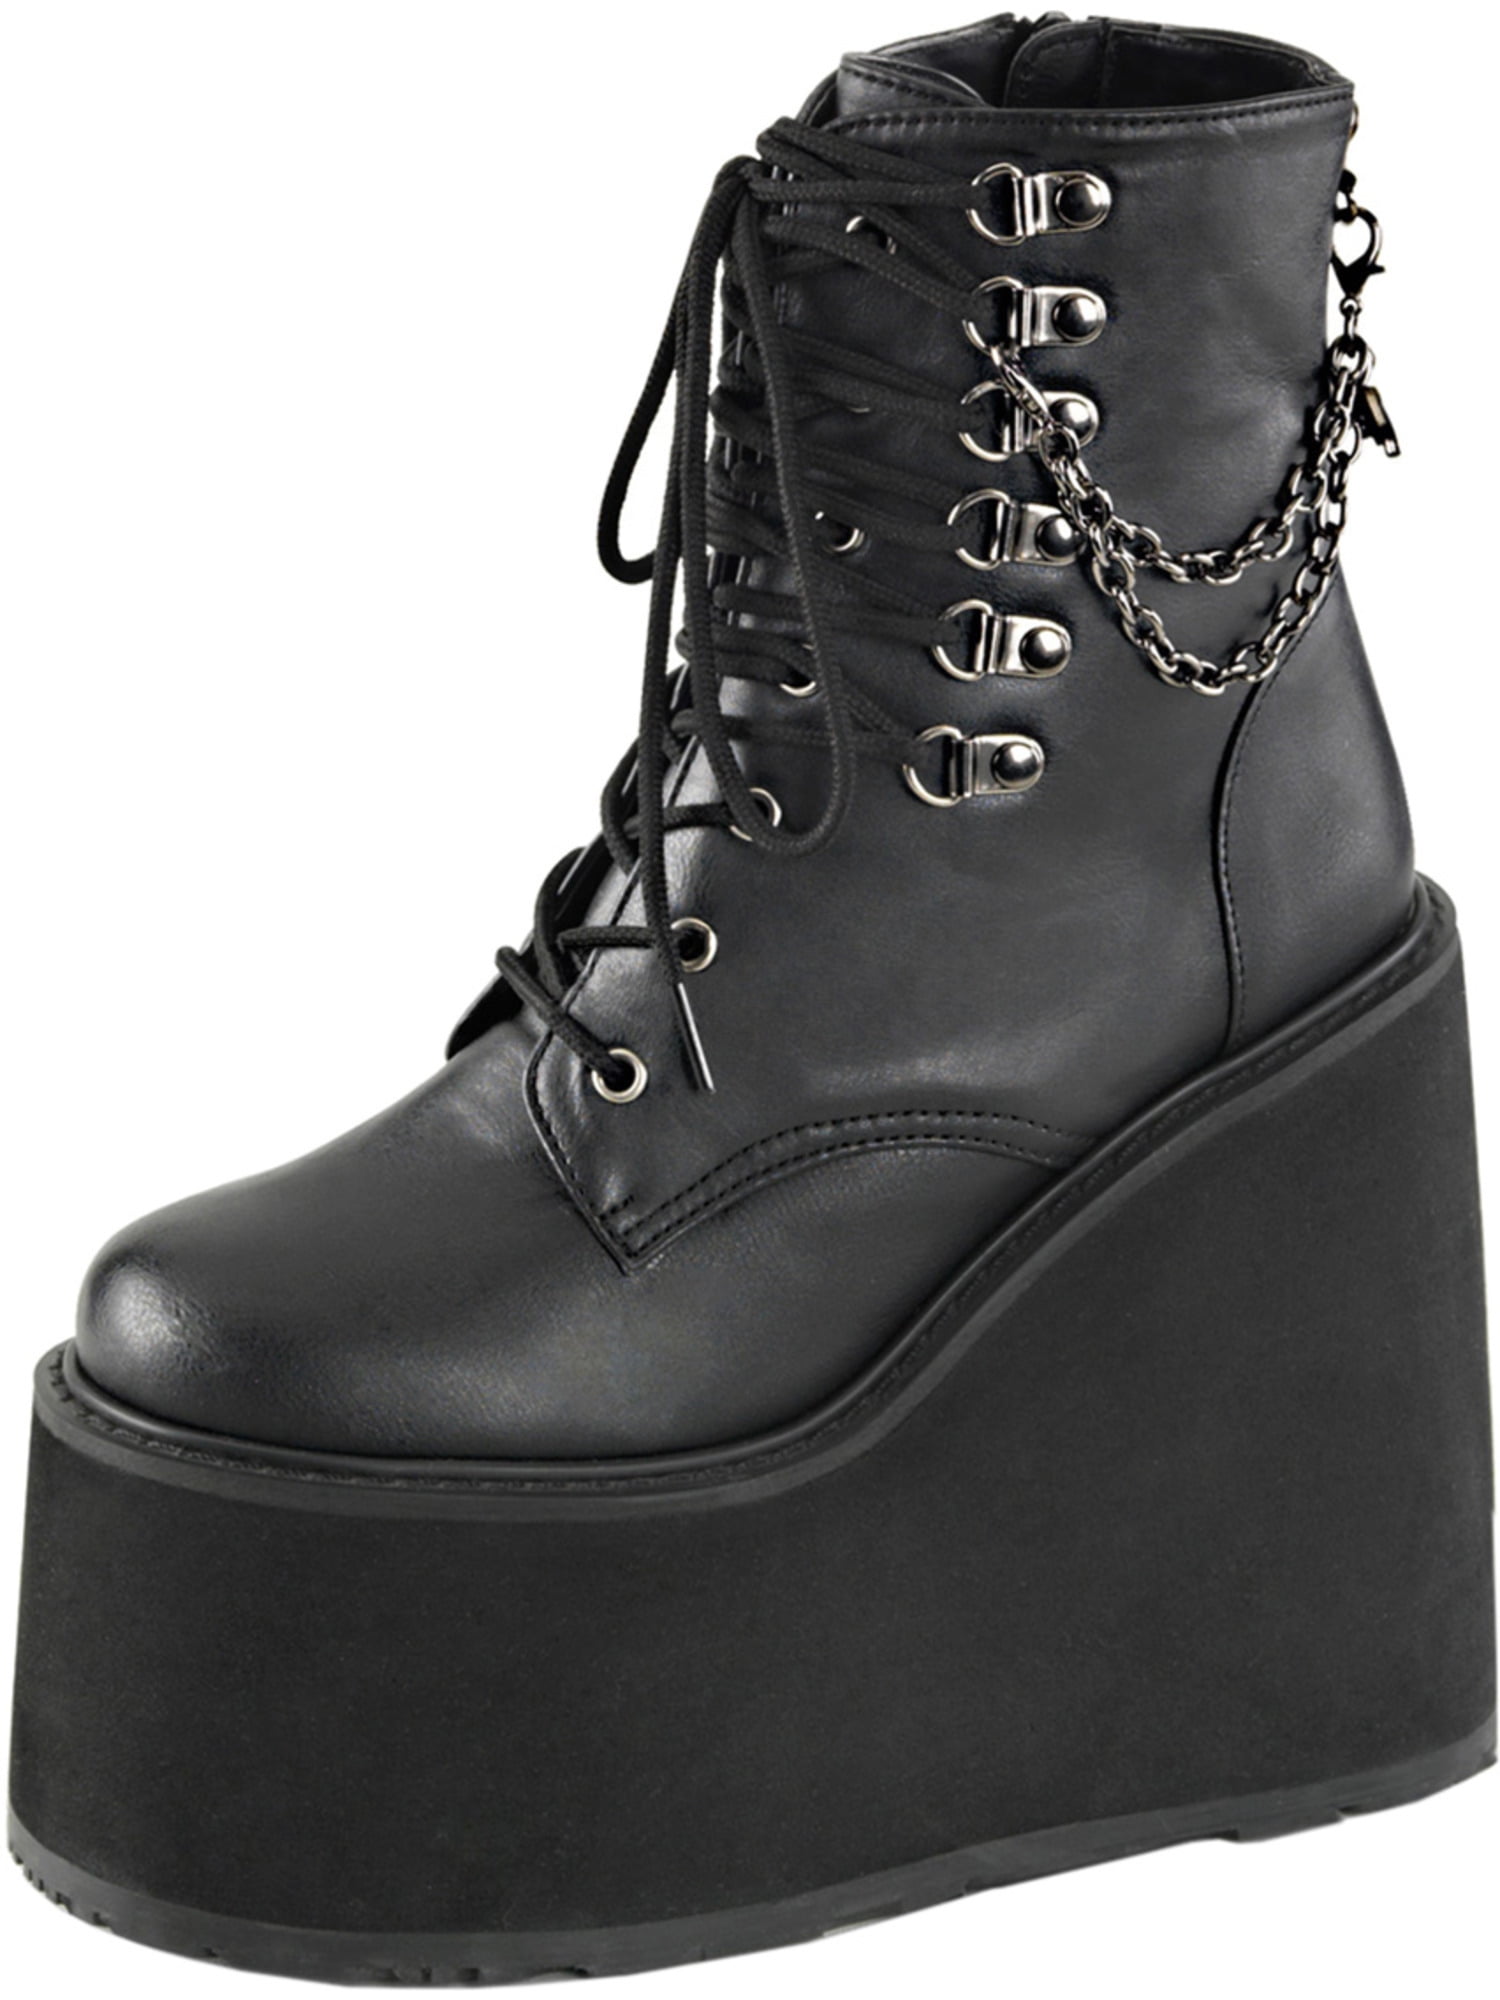 2 inch black ankle boots